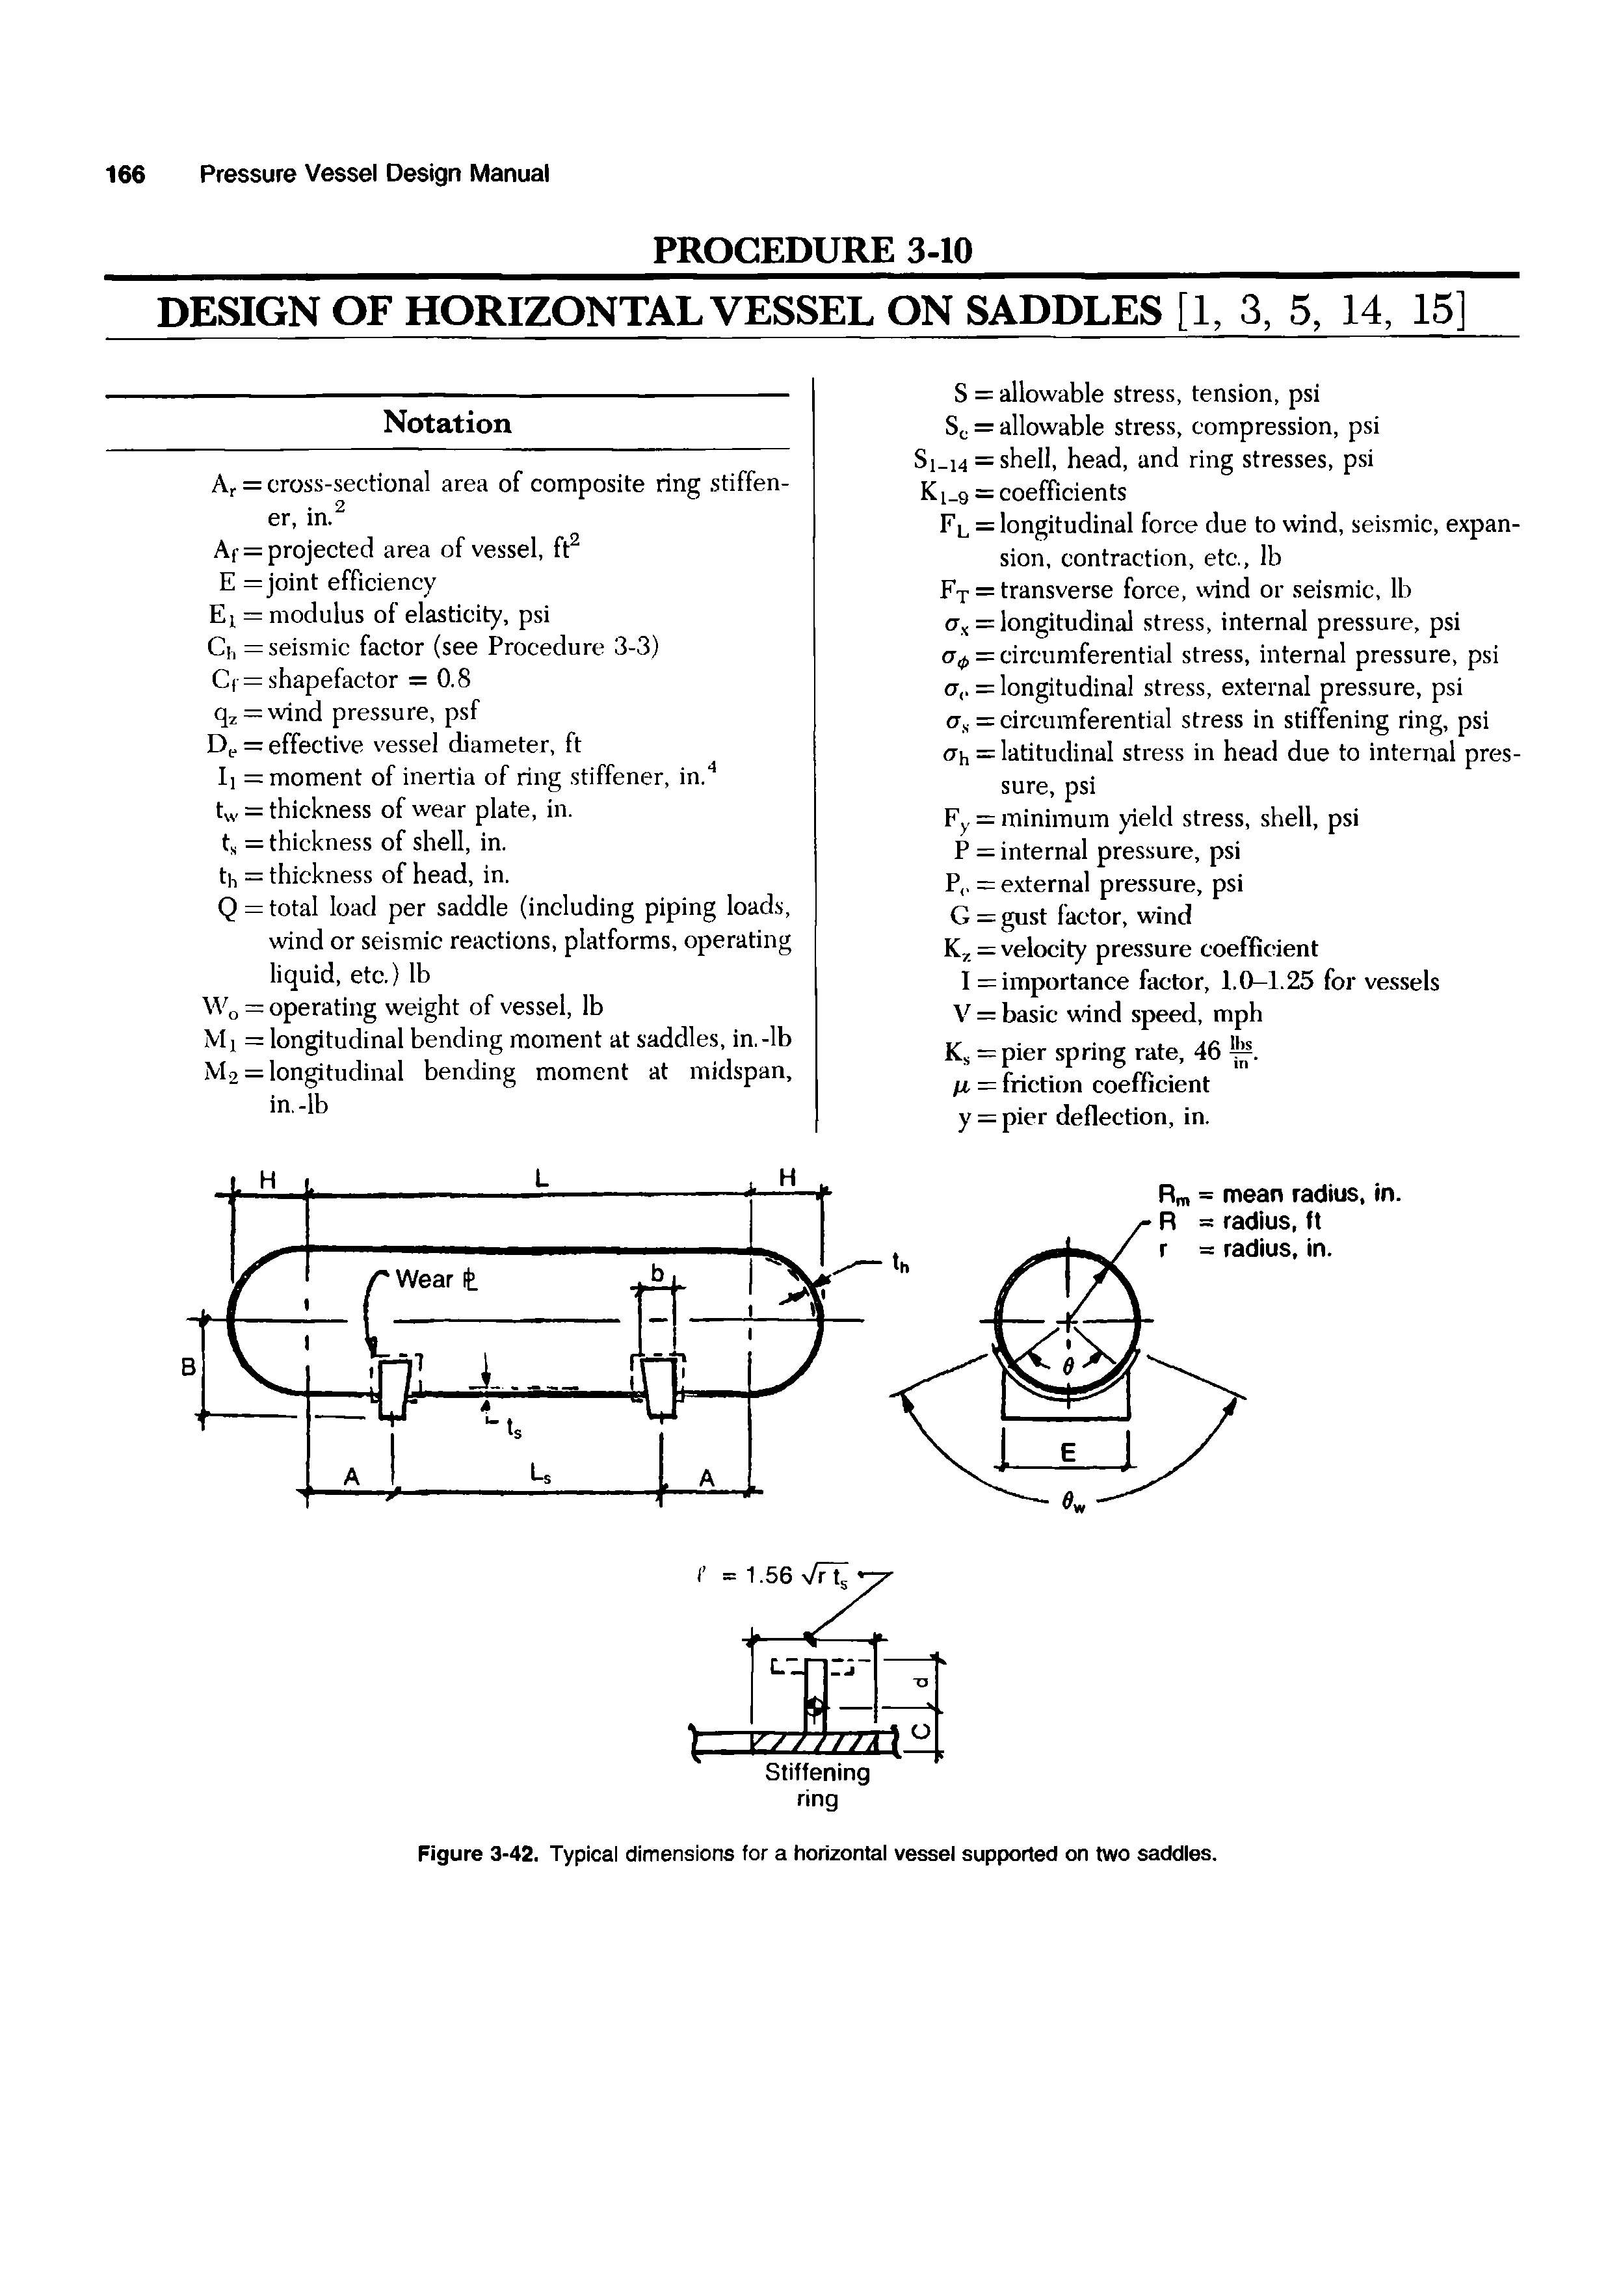 Figure 3-42. Typical dimensions for a horizontal vessel supported on two saddles.